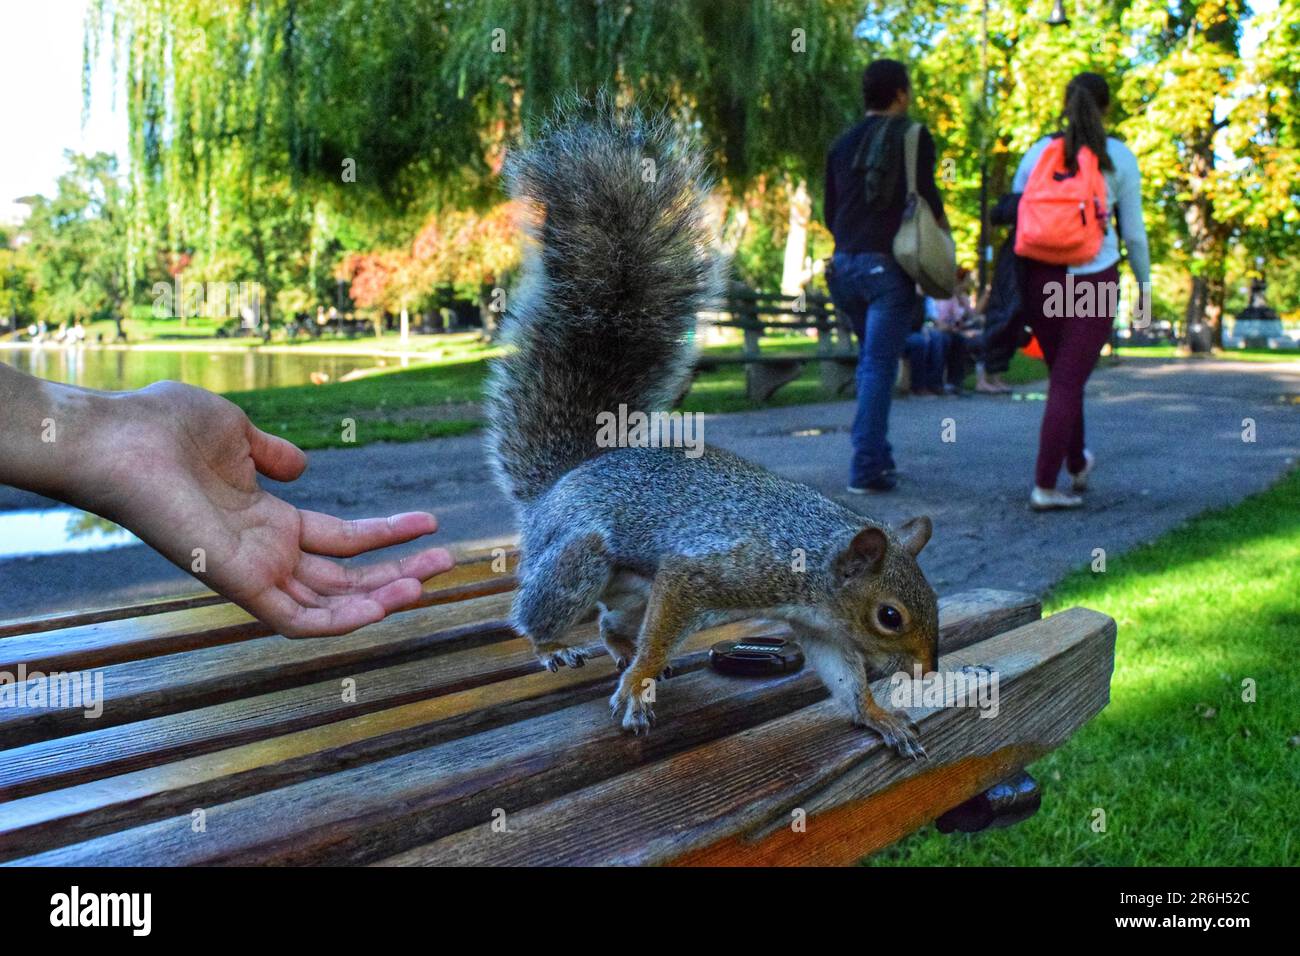 Experience the magic of human-animal interactions in the park as dogs and squirrels playfully engage with people. Joyful moments captured in a vibrant Stock Photo